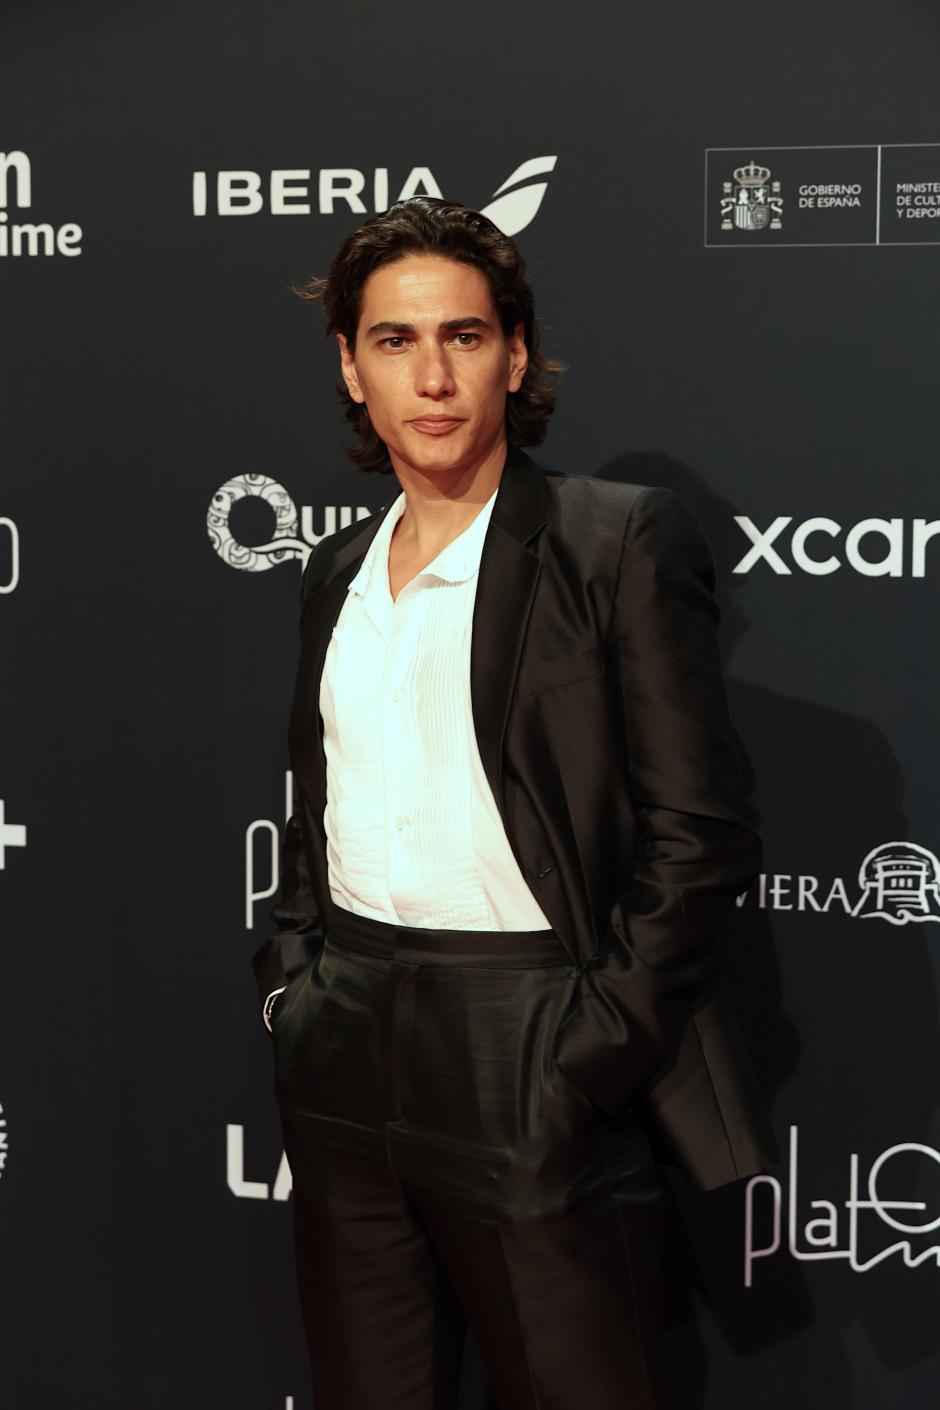 Enzo Vogrinic at photocall for 11 edition of Platino awards in Mexico